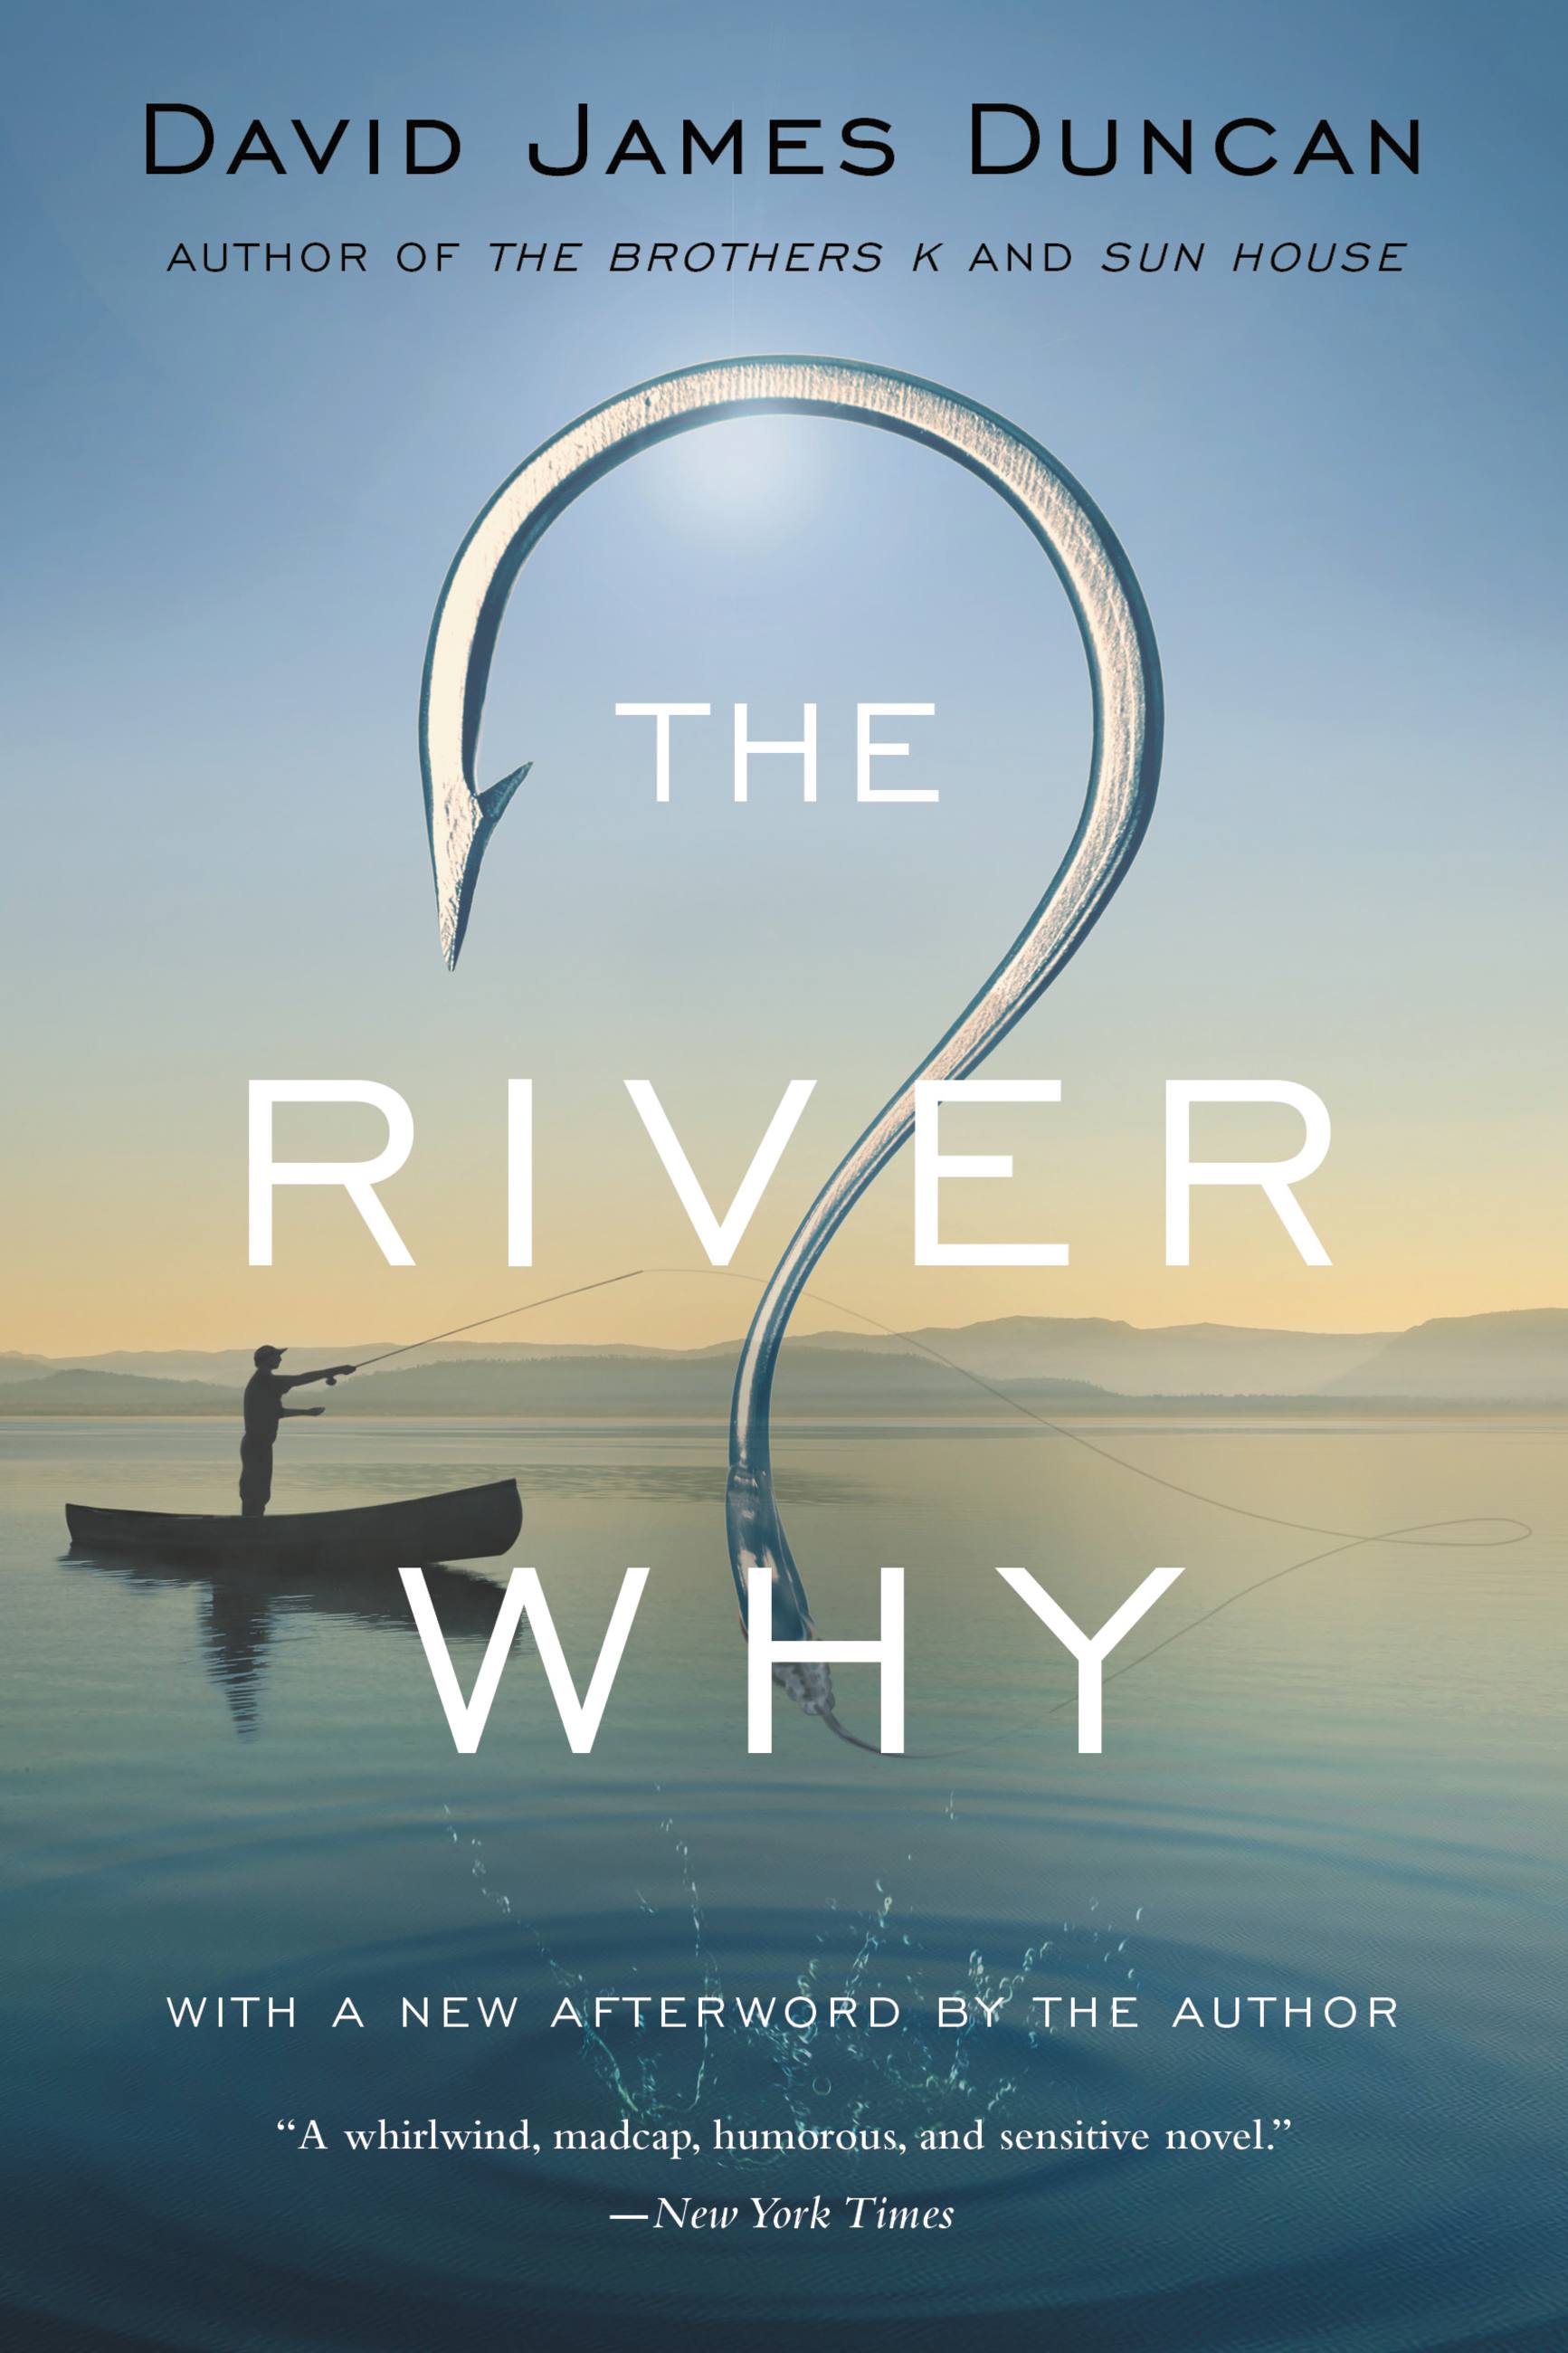 The River Why by David James Duncan | Hachette Book Group